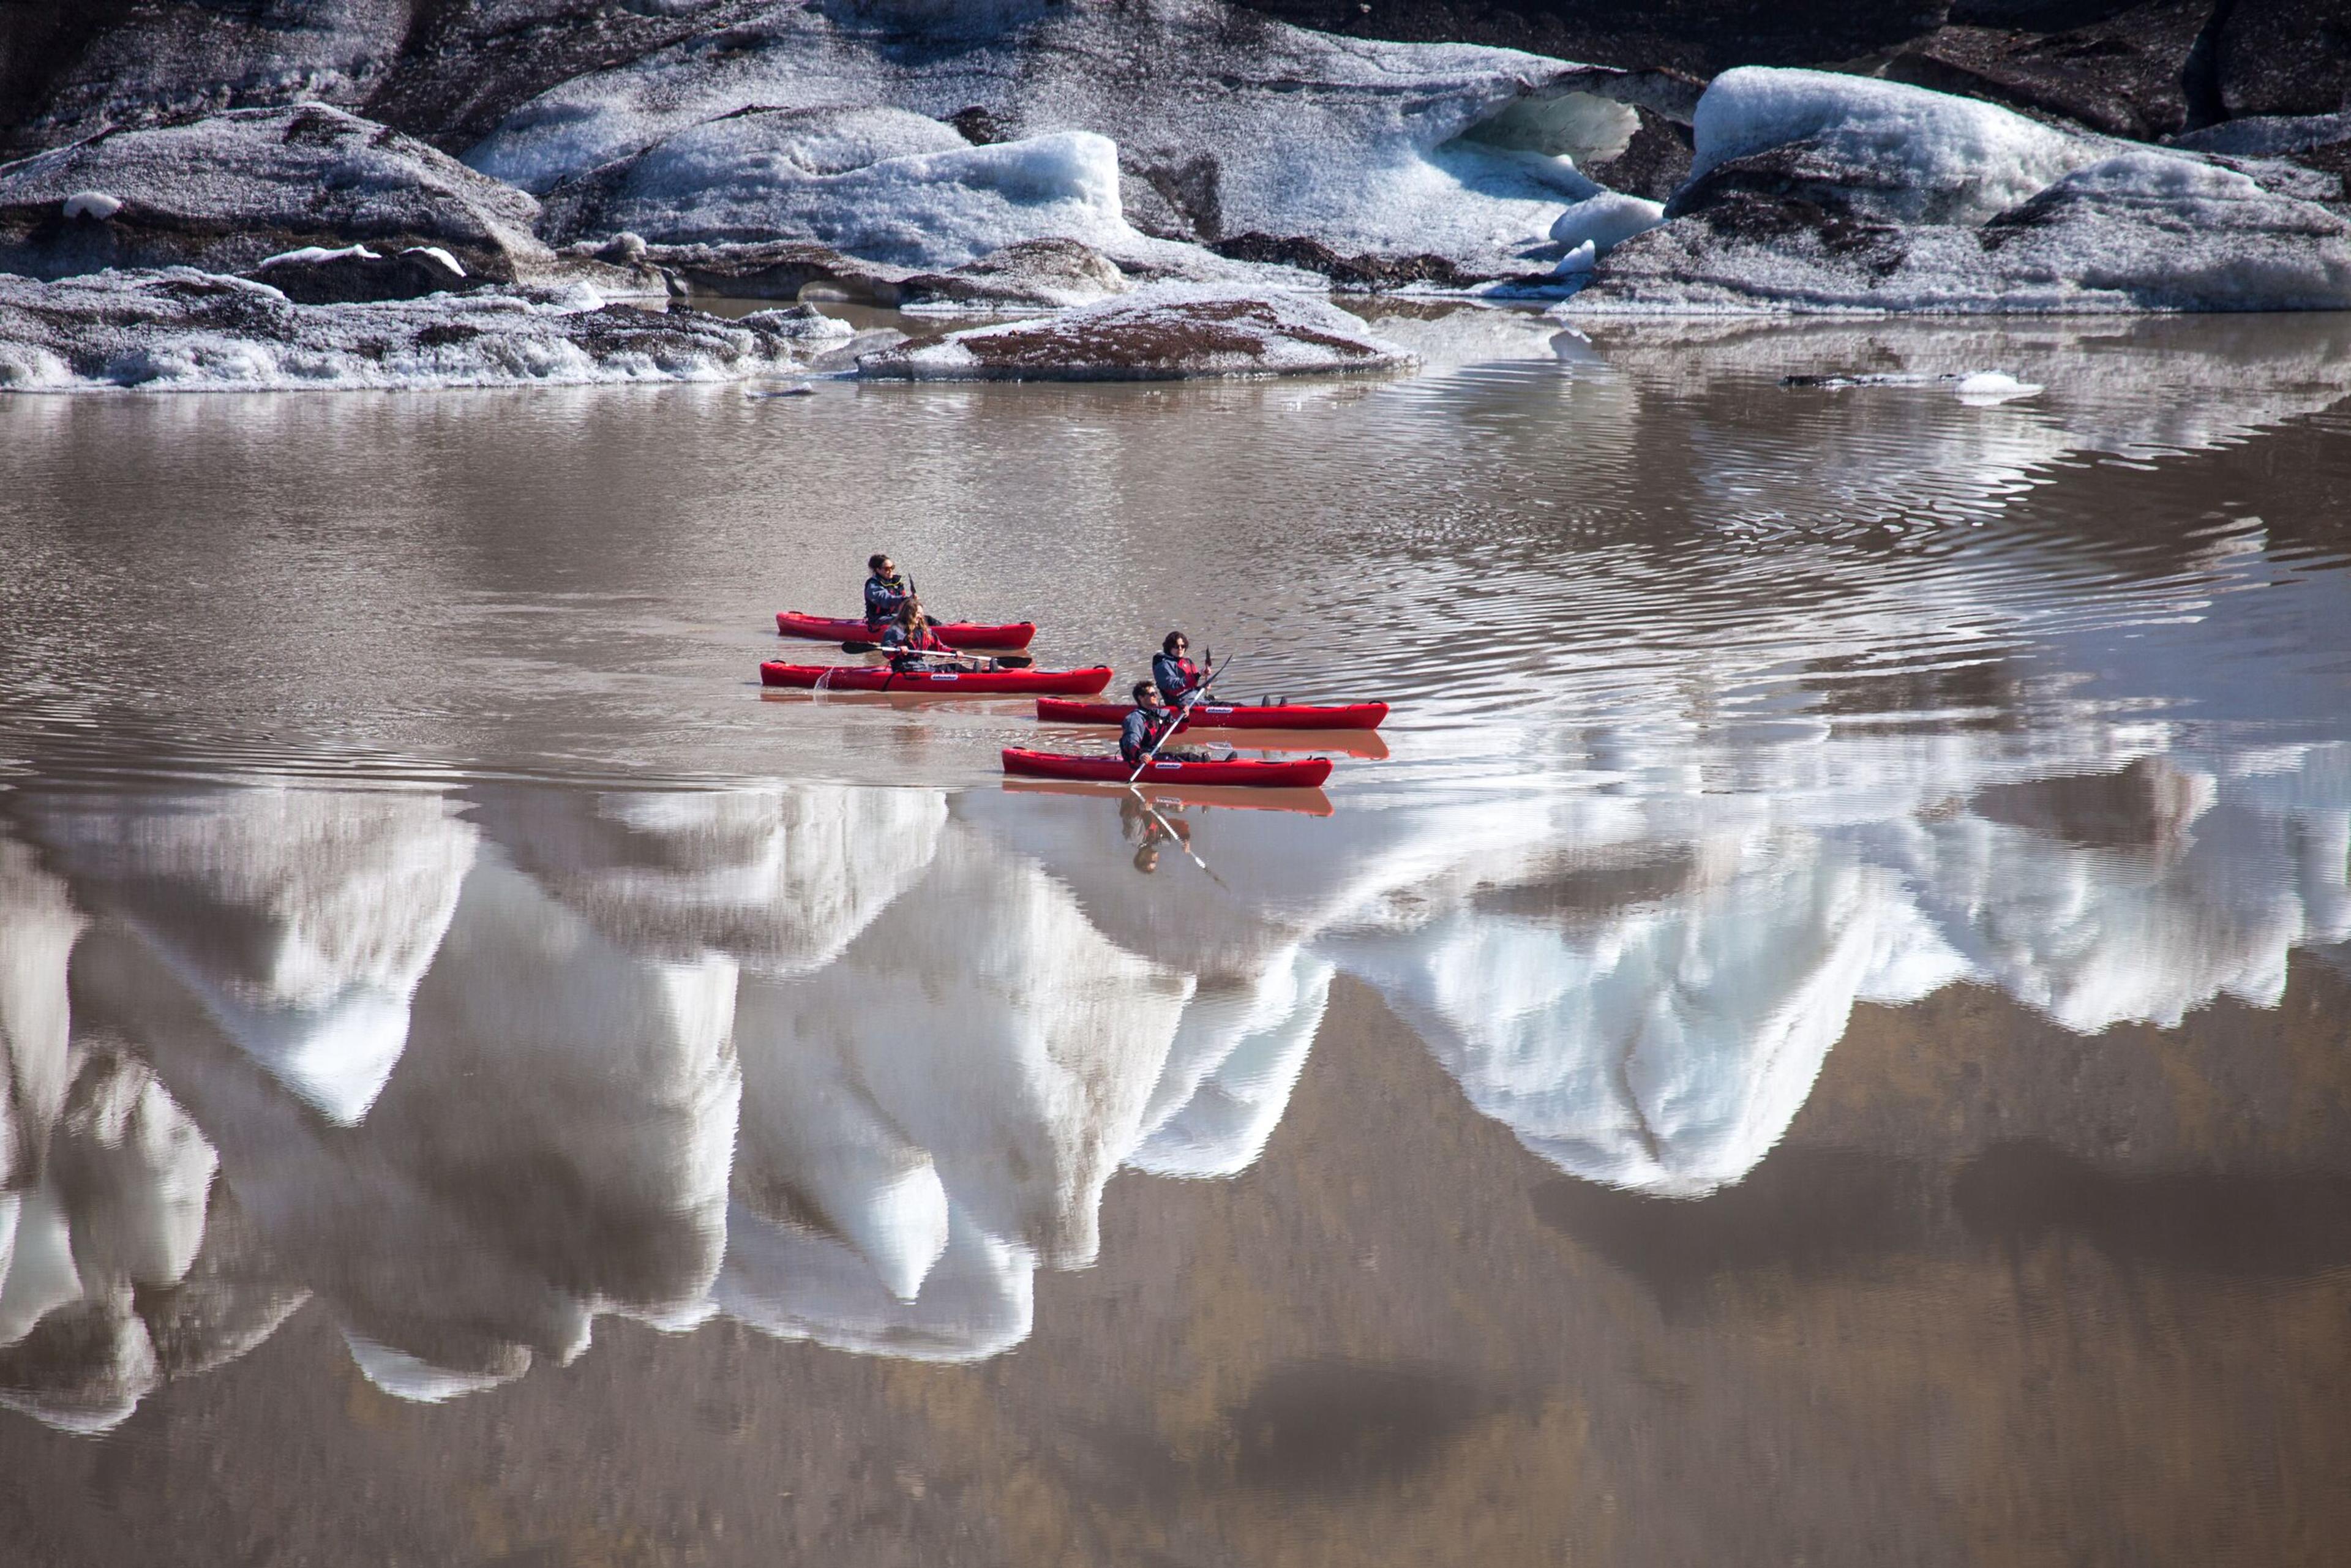 Four kayakers gracefully paddling across a glacier lagoon, with the icebergs beautifully mirrored in the tranquil waters.